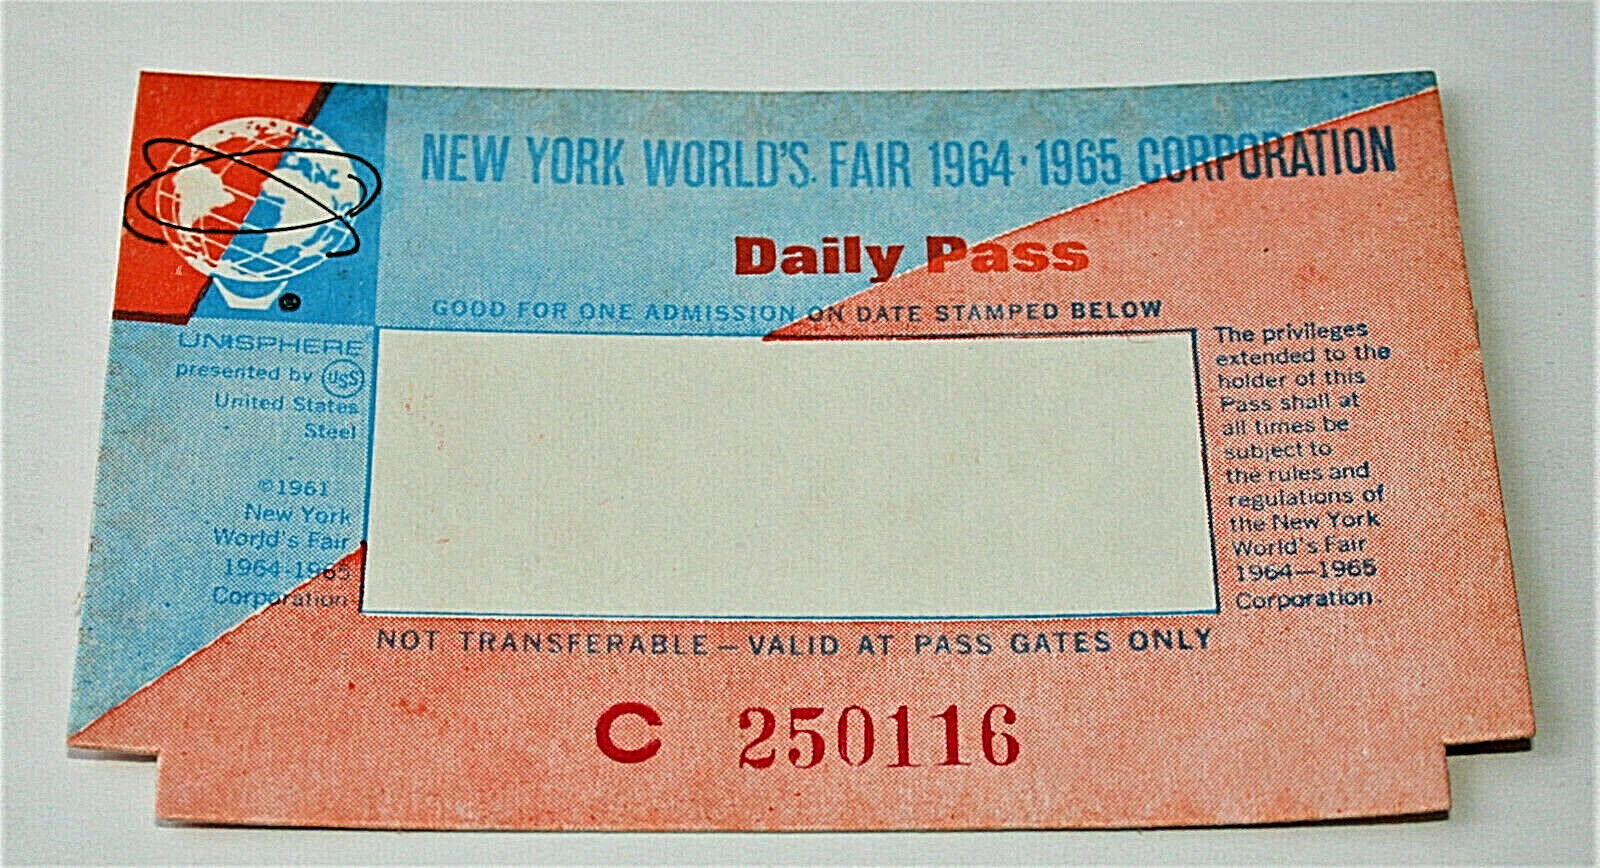 2 1964 1965 New York Worlds Fair Admissions Daily Pass Entrance Ticket NOS New